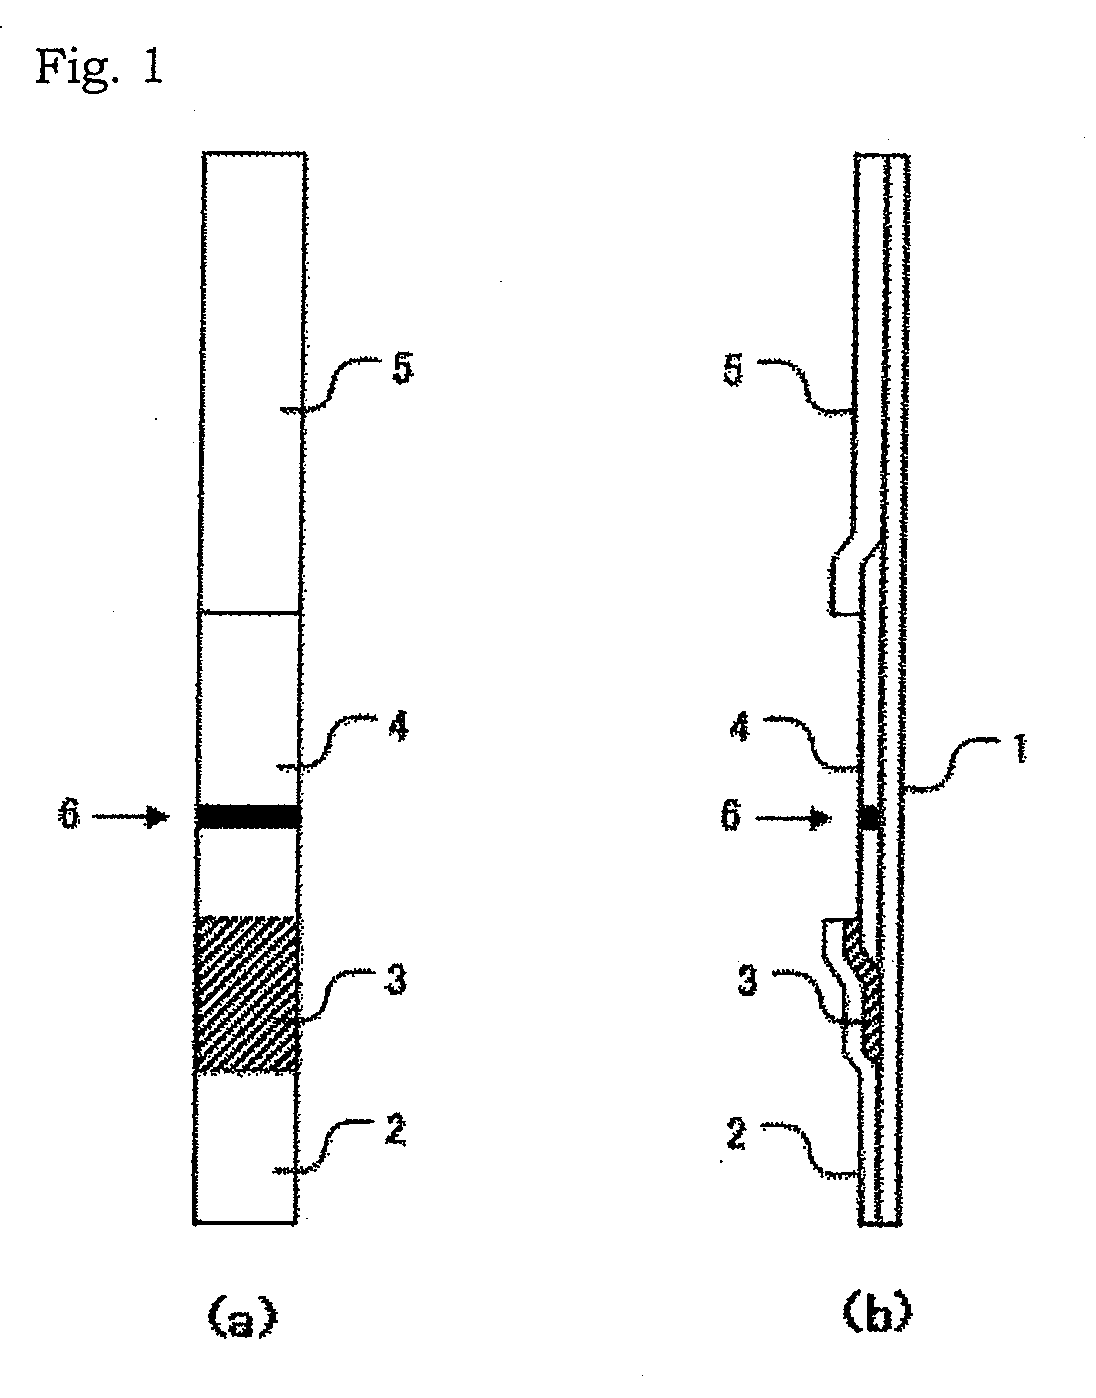 Method for measurement of sars virus nucleocapsid protein, reagent kit for the measurement, test device, monoclonal antibody directed against sars virus nucleocapsid protein, and hybridoma capable of producing the monoclonal antibody